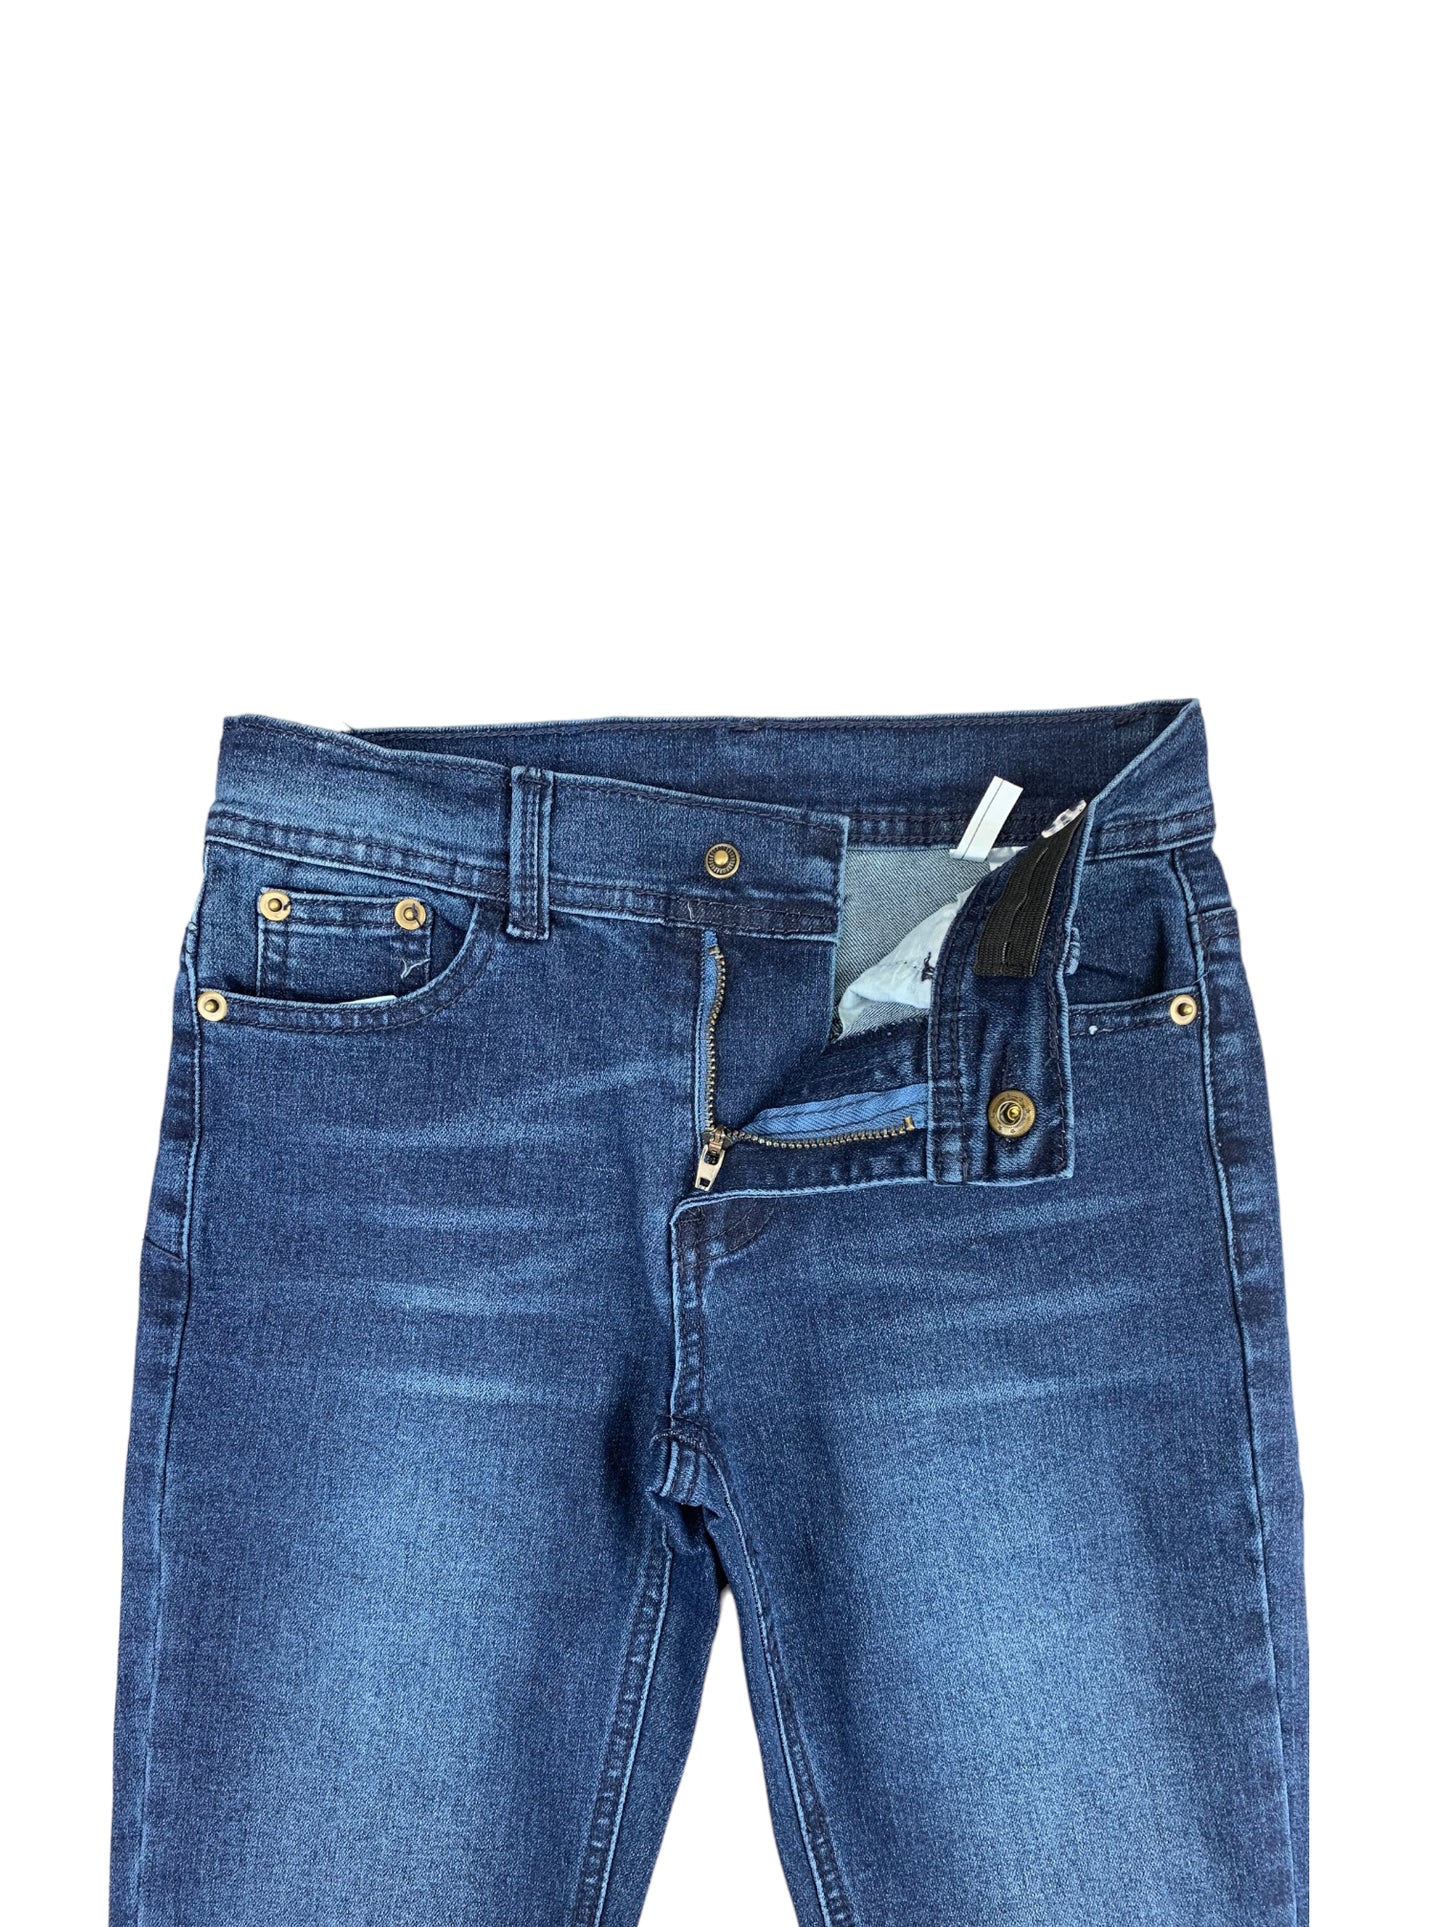 Blue jeans Northcoast for boys 8 to 16 years